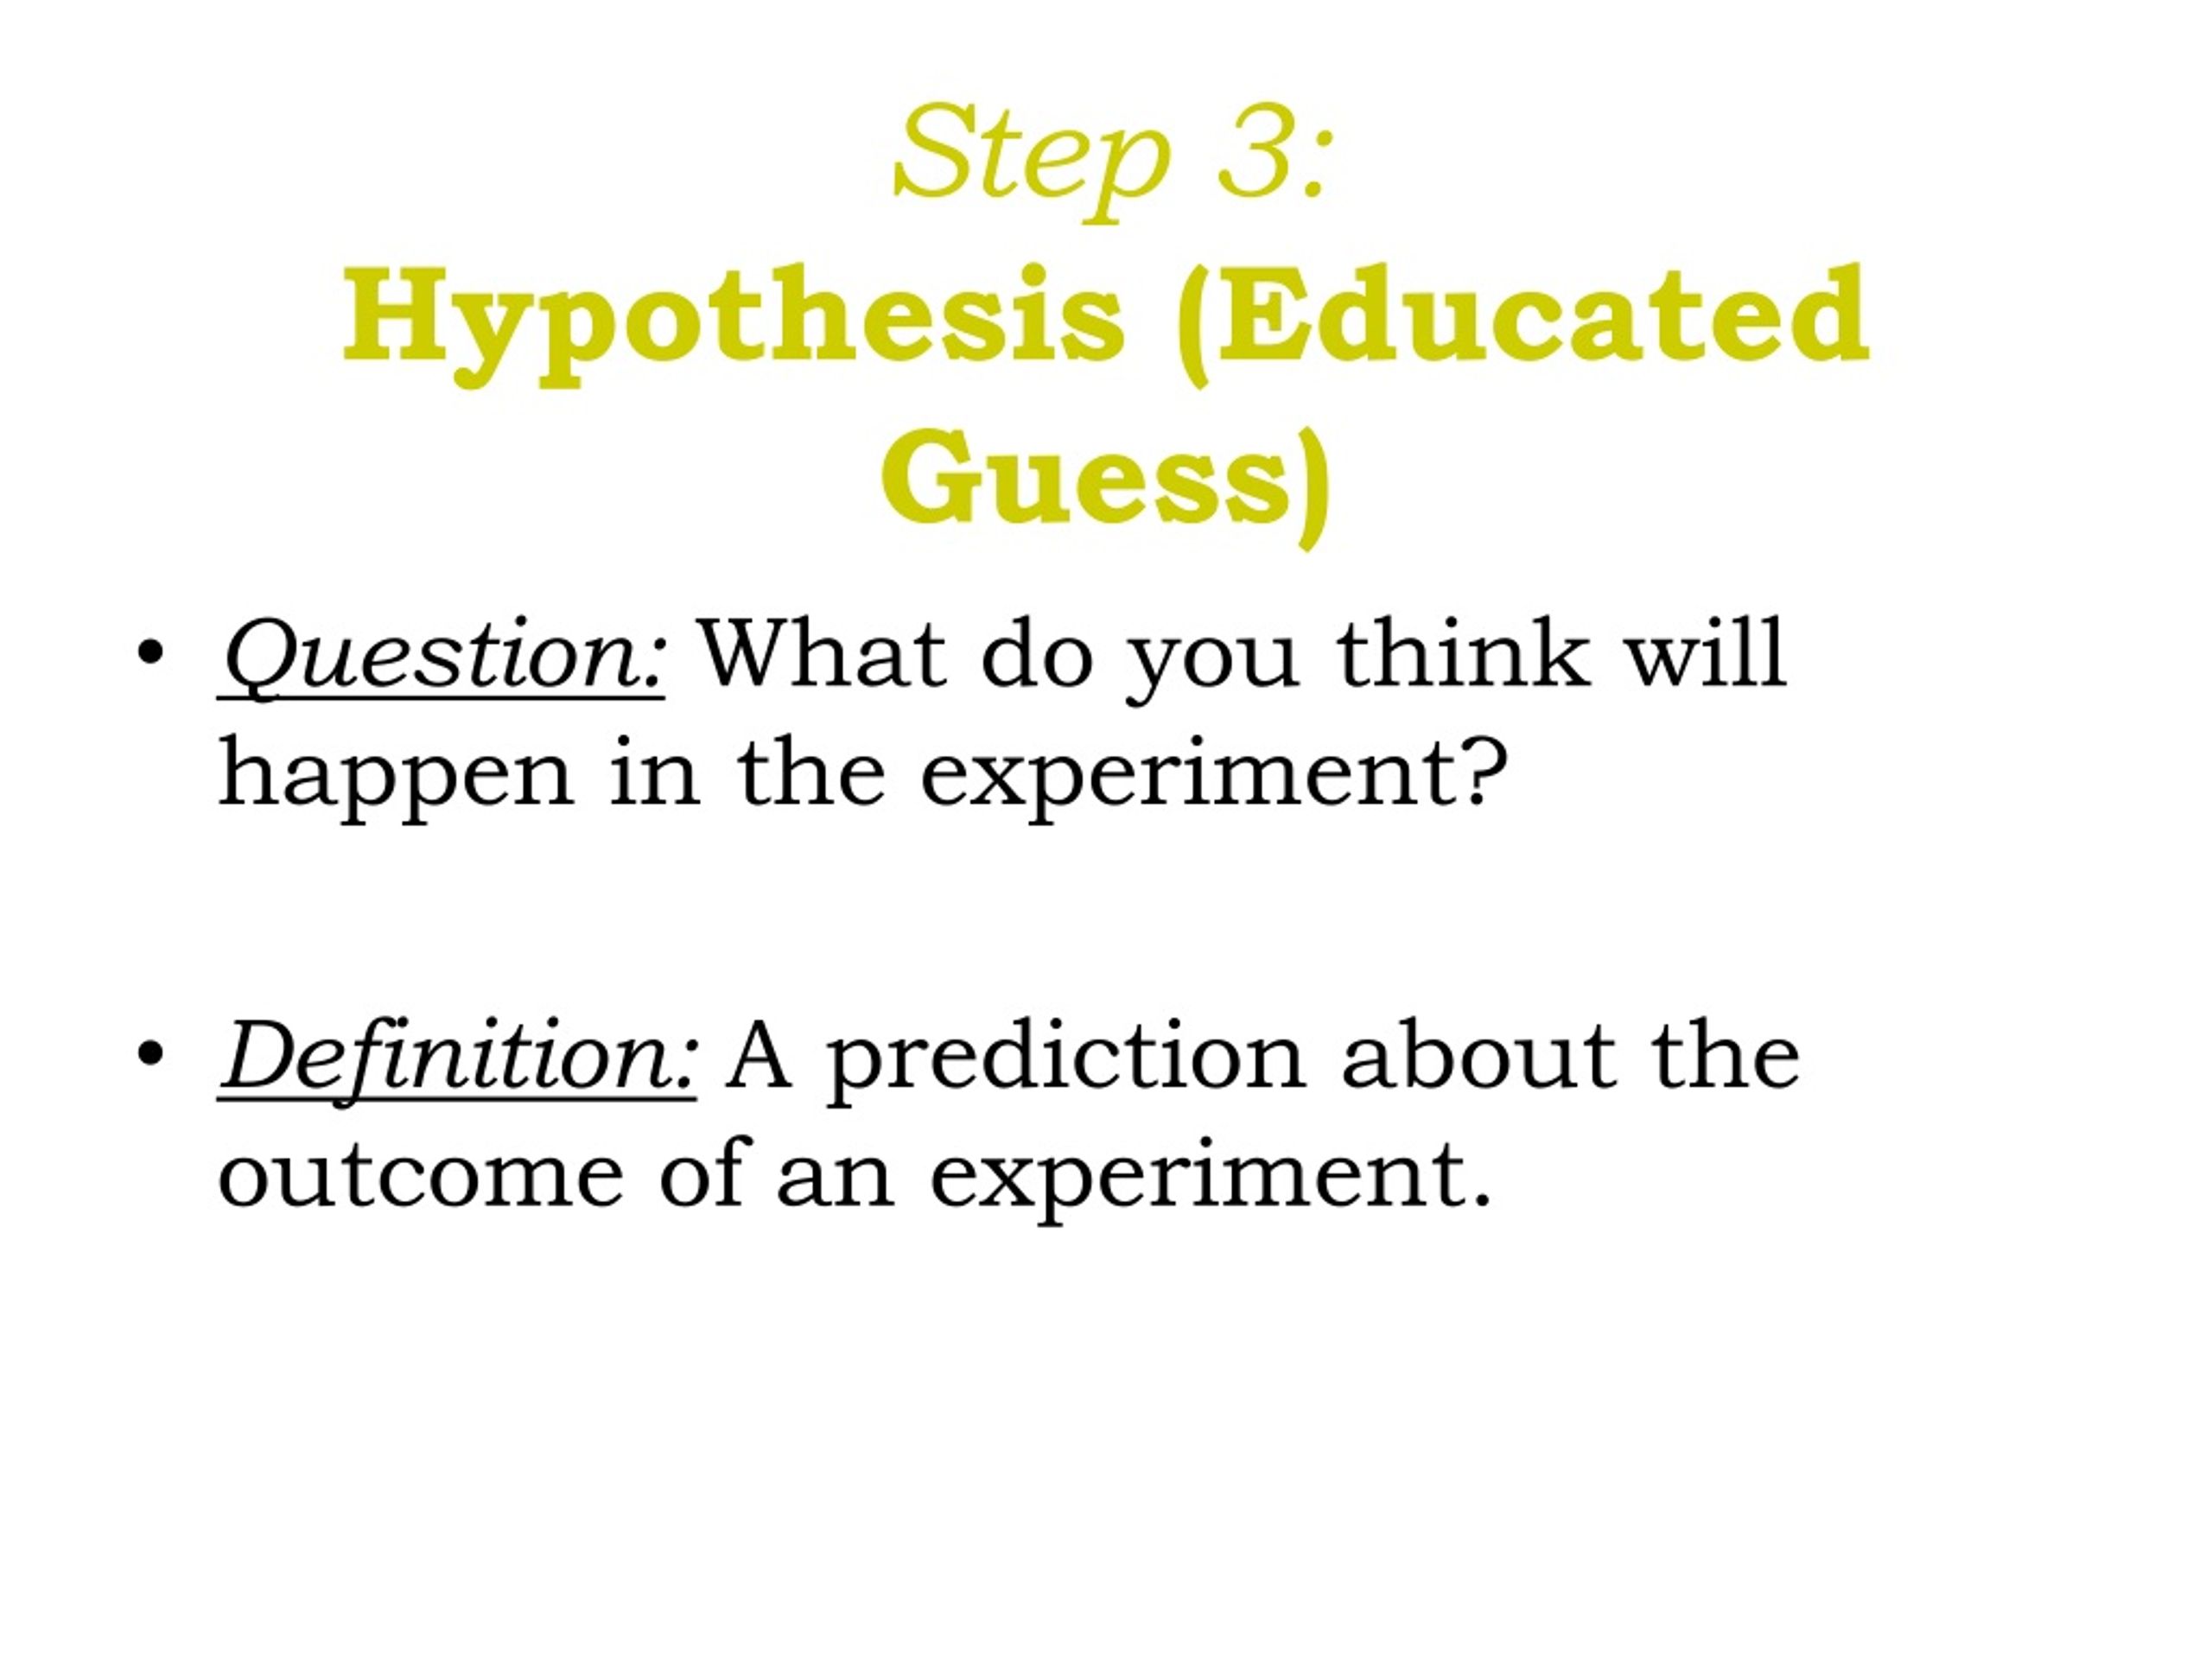 hypothesis definition educated guess